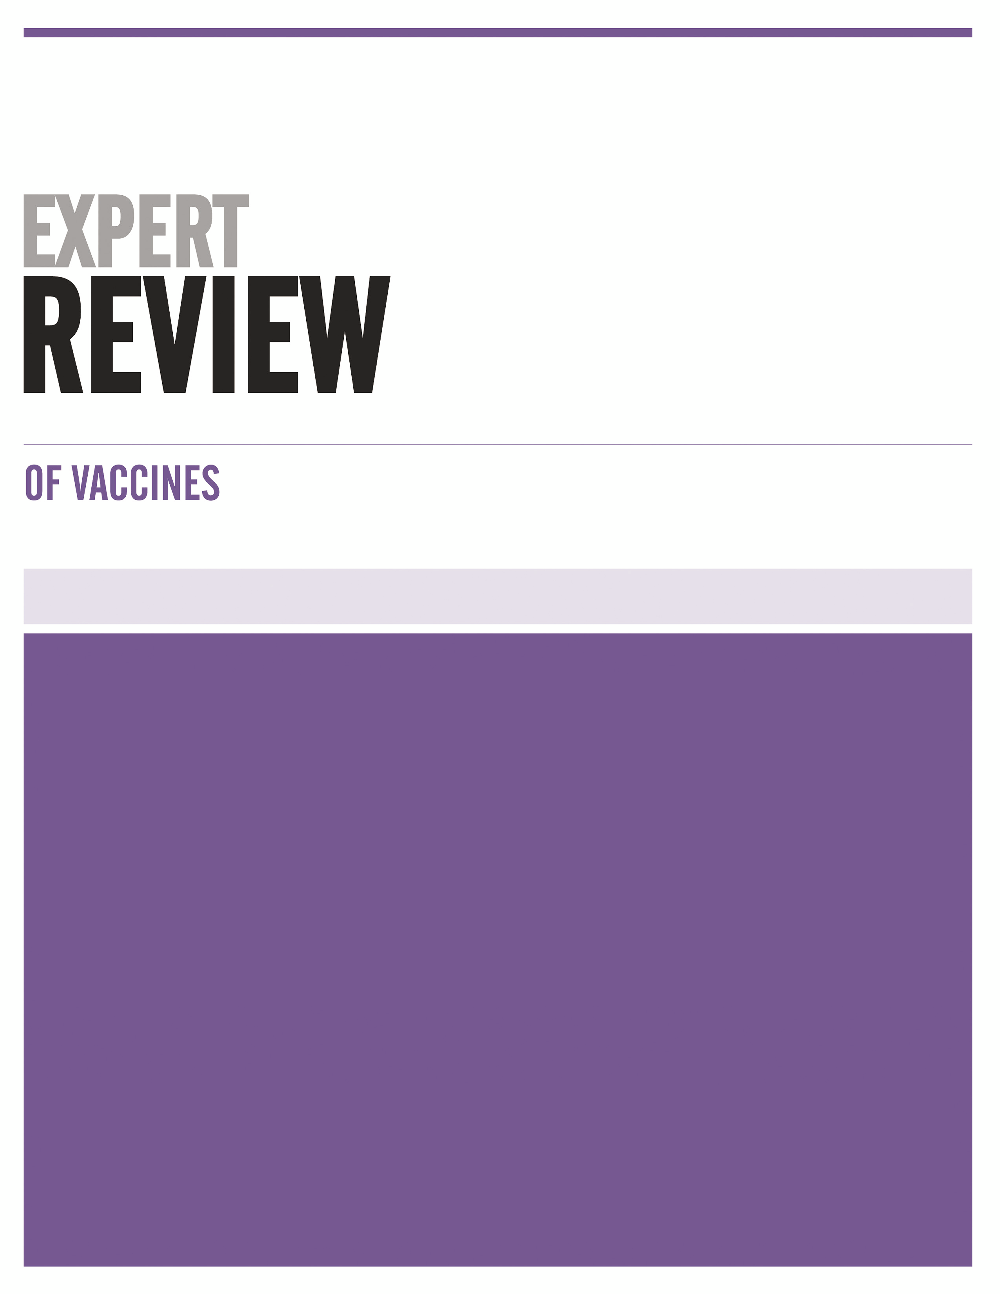 Expert Review of Vaccines journal